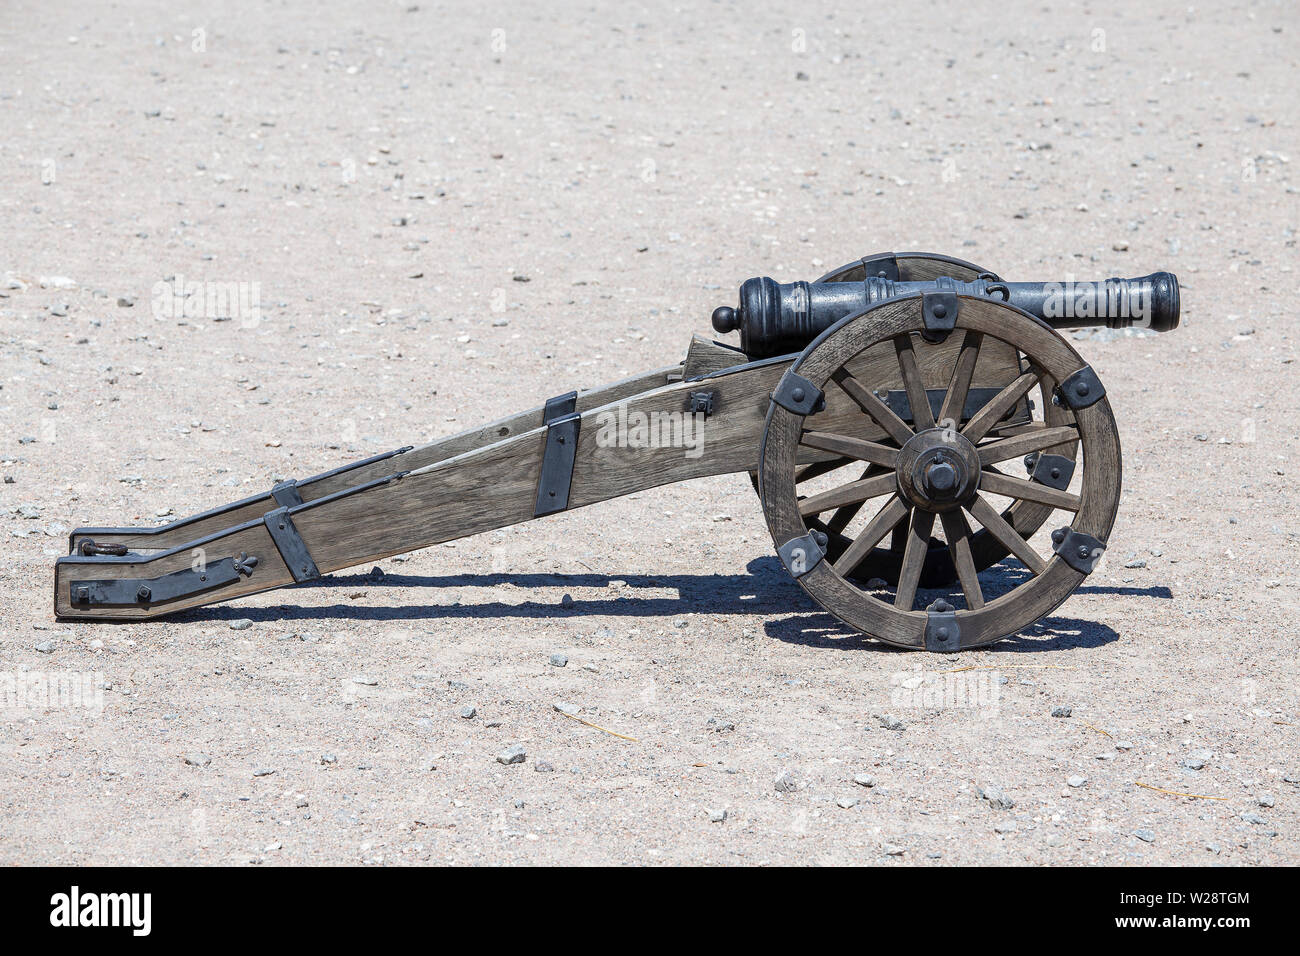 Ancient cannon of the castle fortress. Medieval artillery gun, outdoors, close up Stock Photo